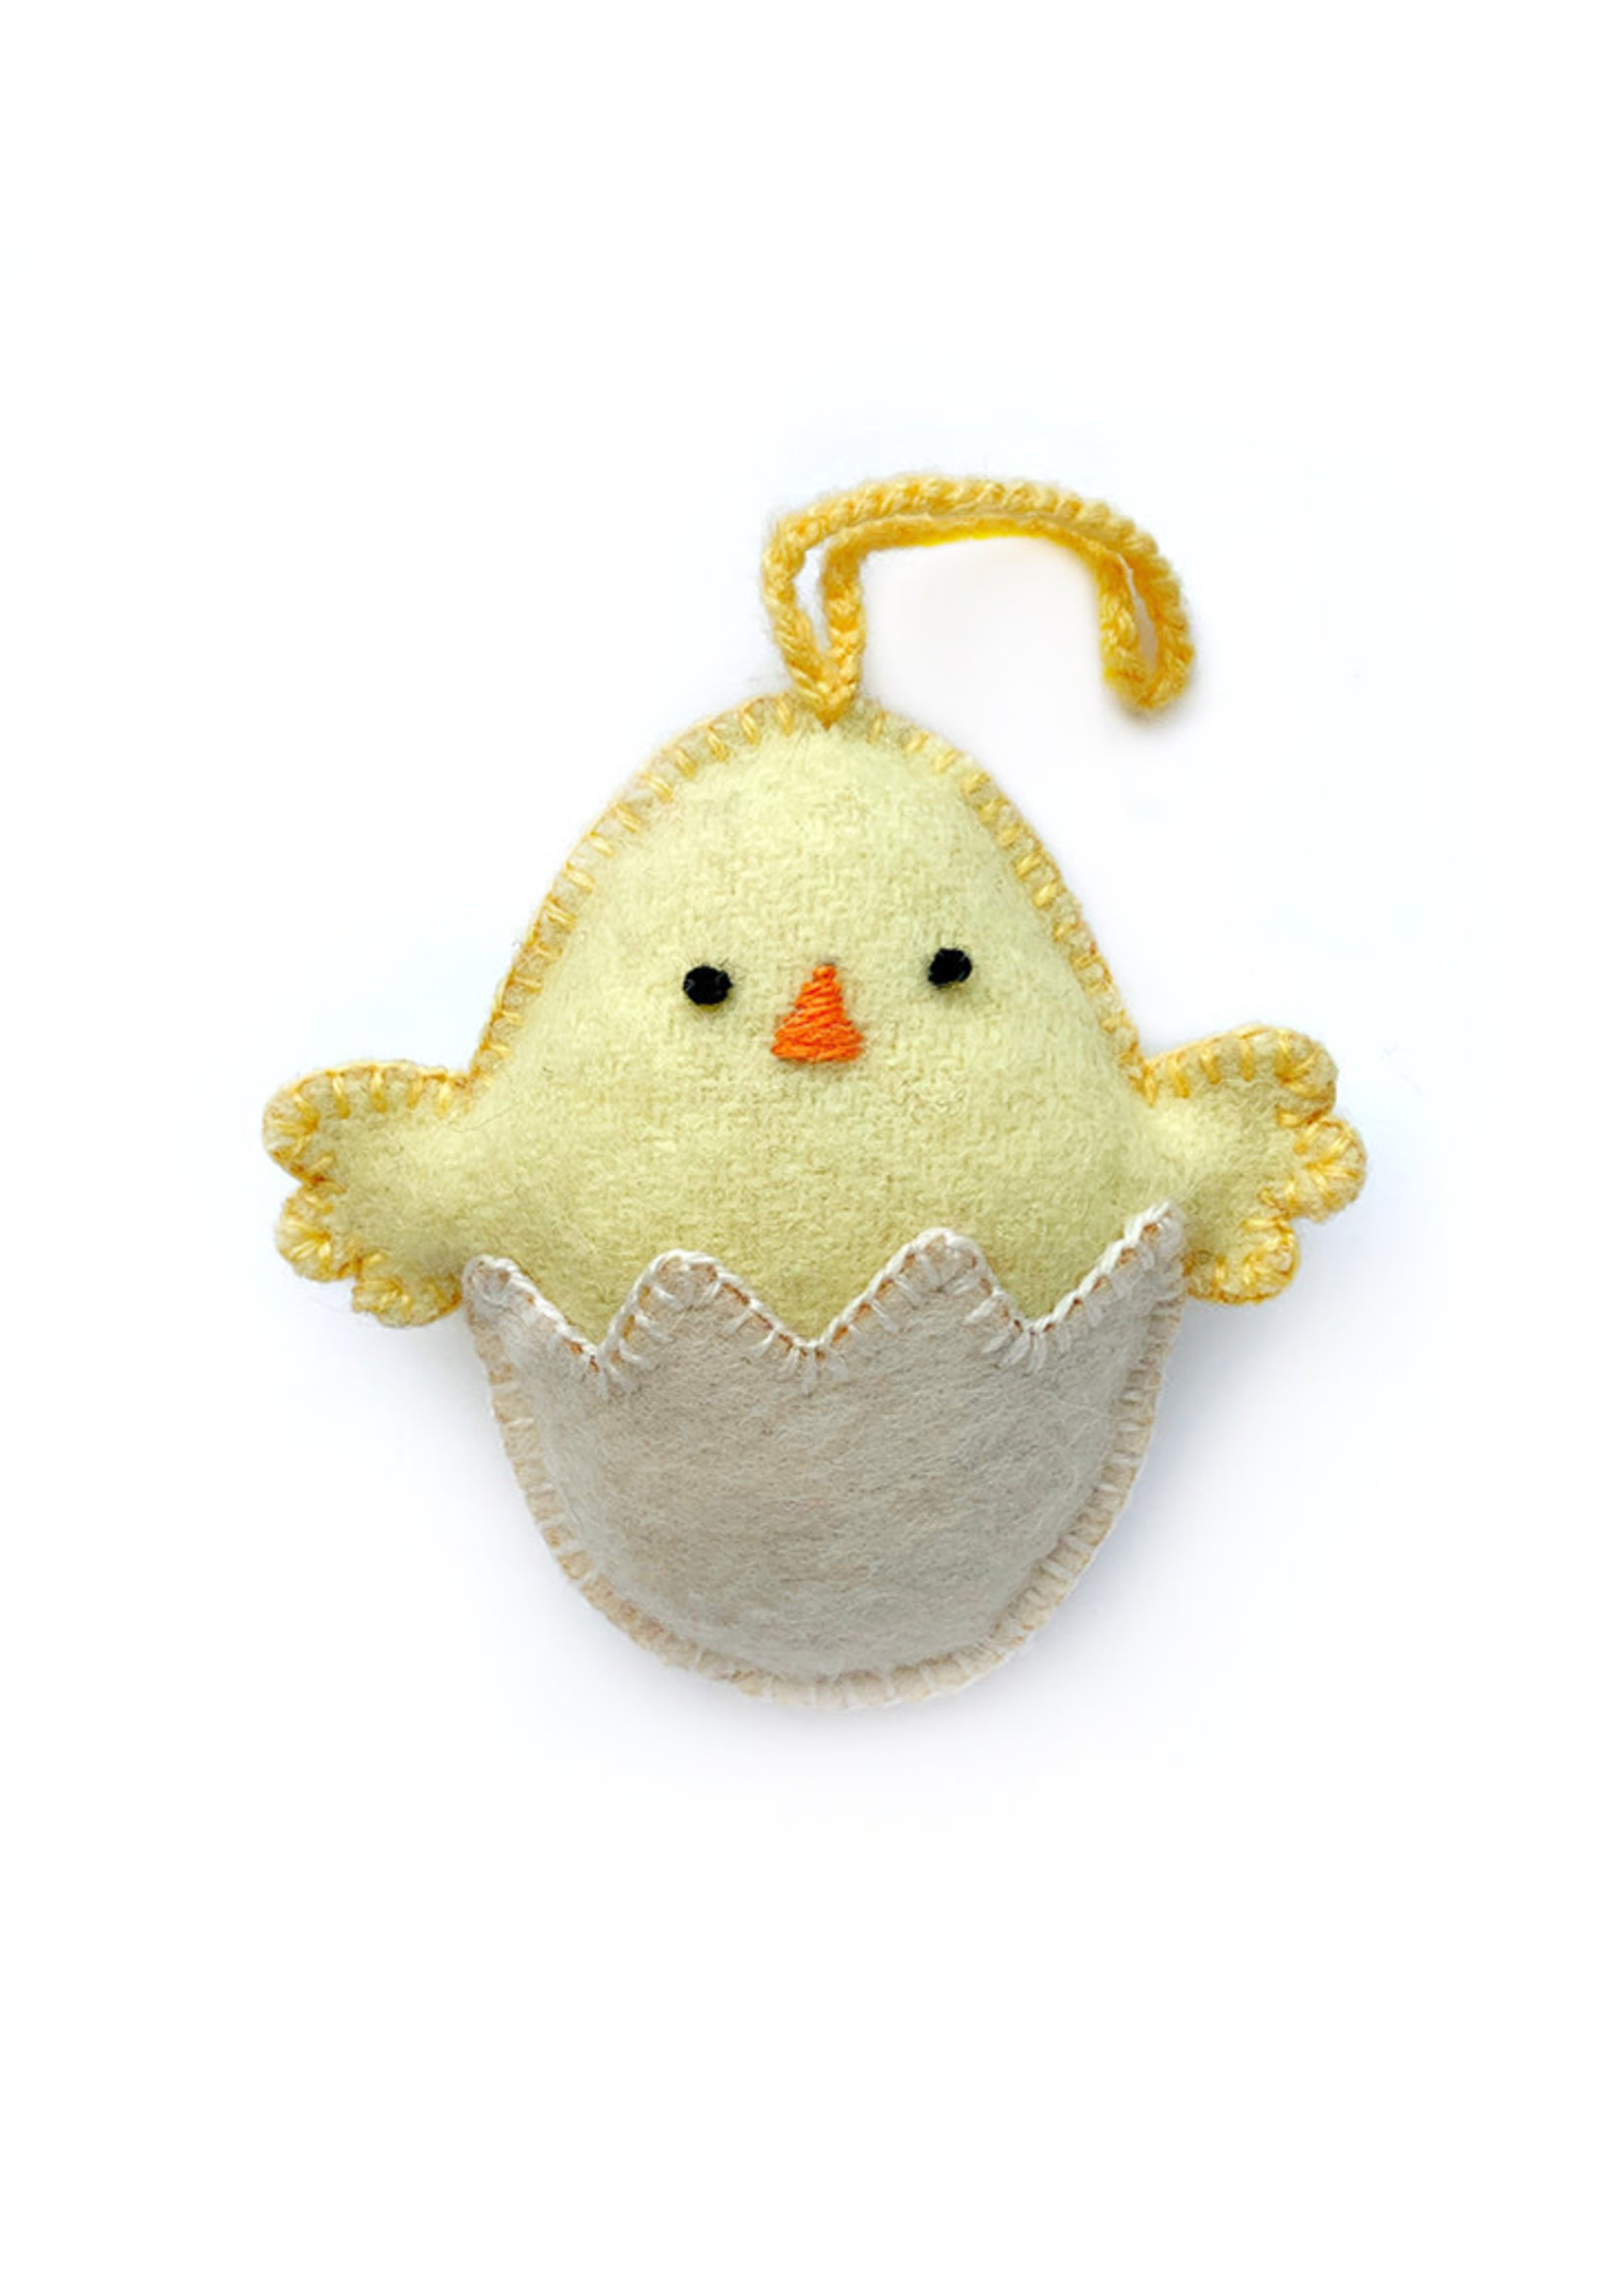 Ornaments 4 Orphans Baby Chick in Egg Easter Ornament